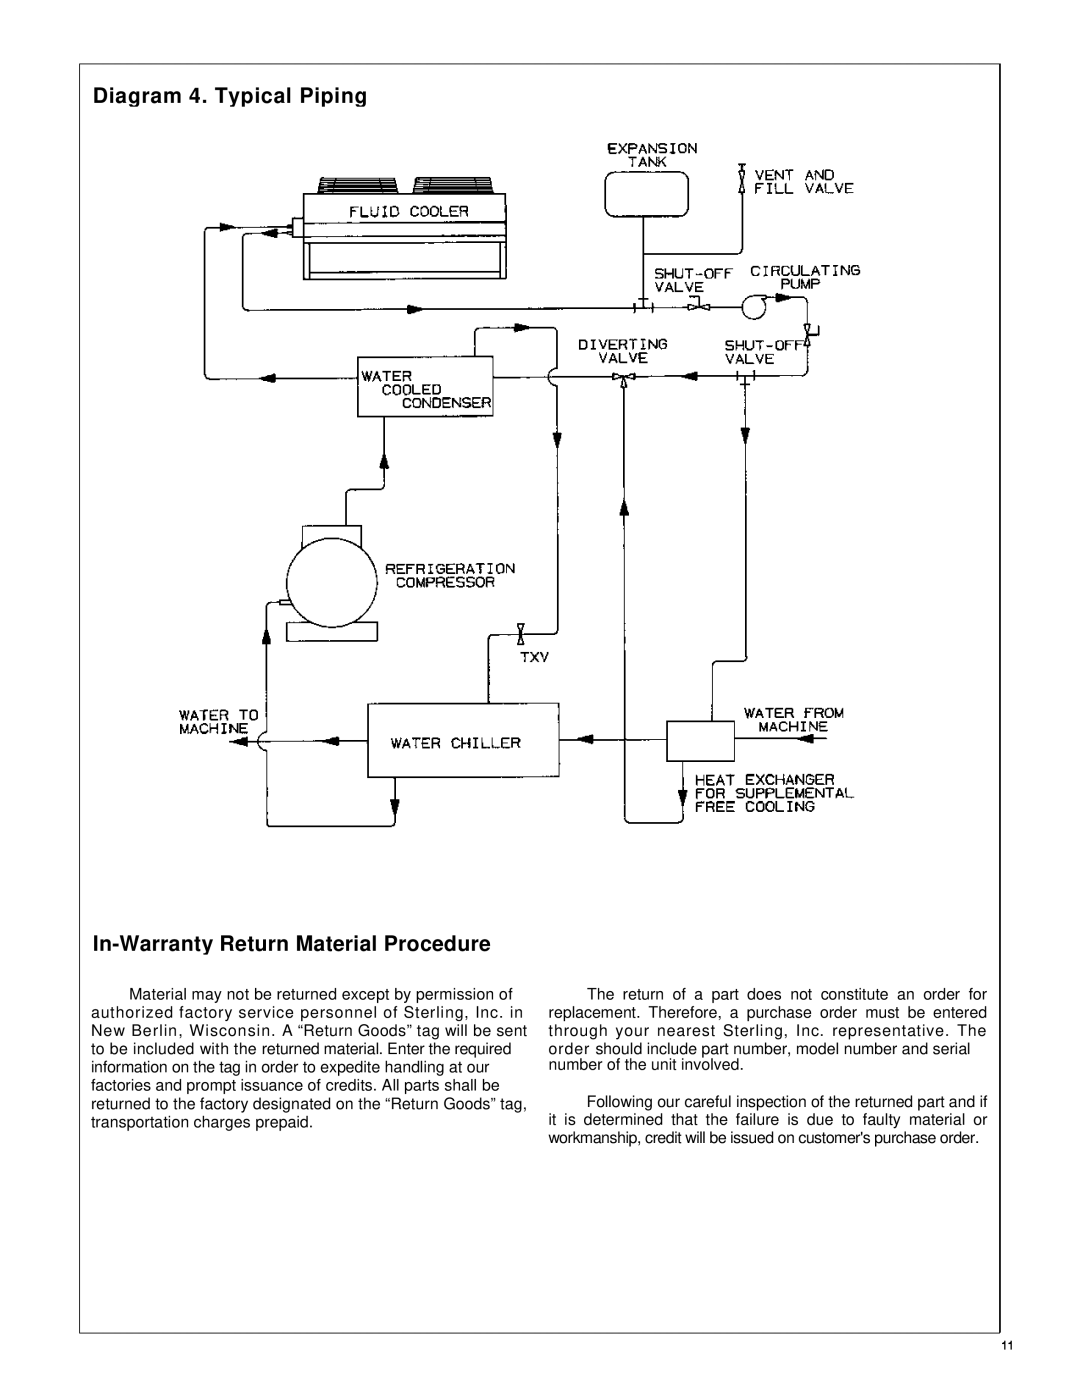 Sterling 25001301, SC3-600 warranty Diagram 4. Typical Piping, In-WarrantyReturn Material Procedure 